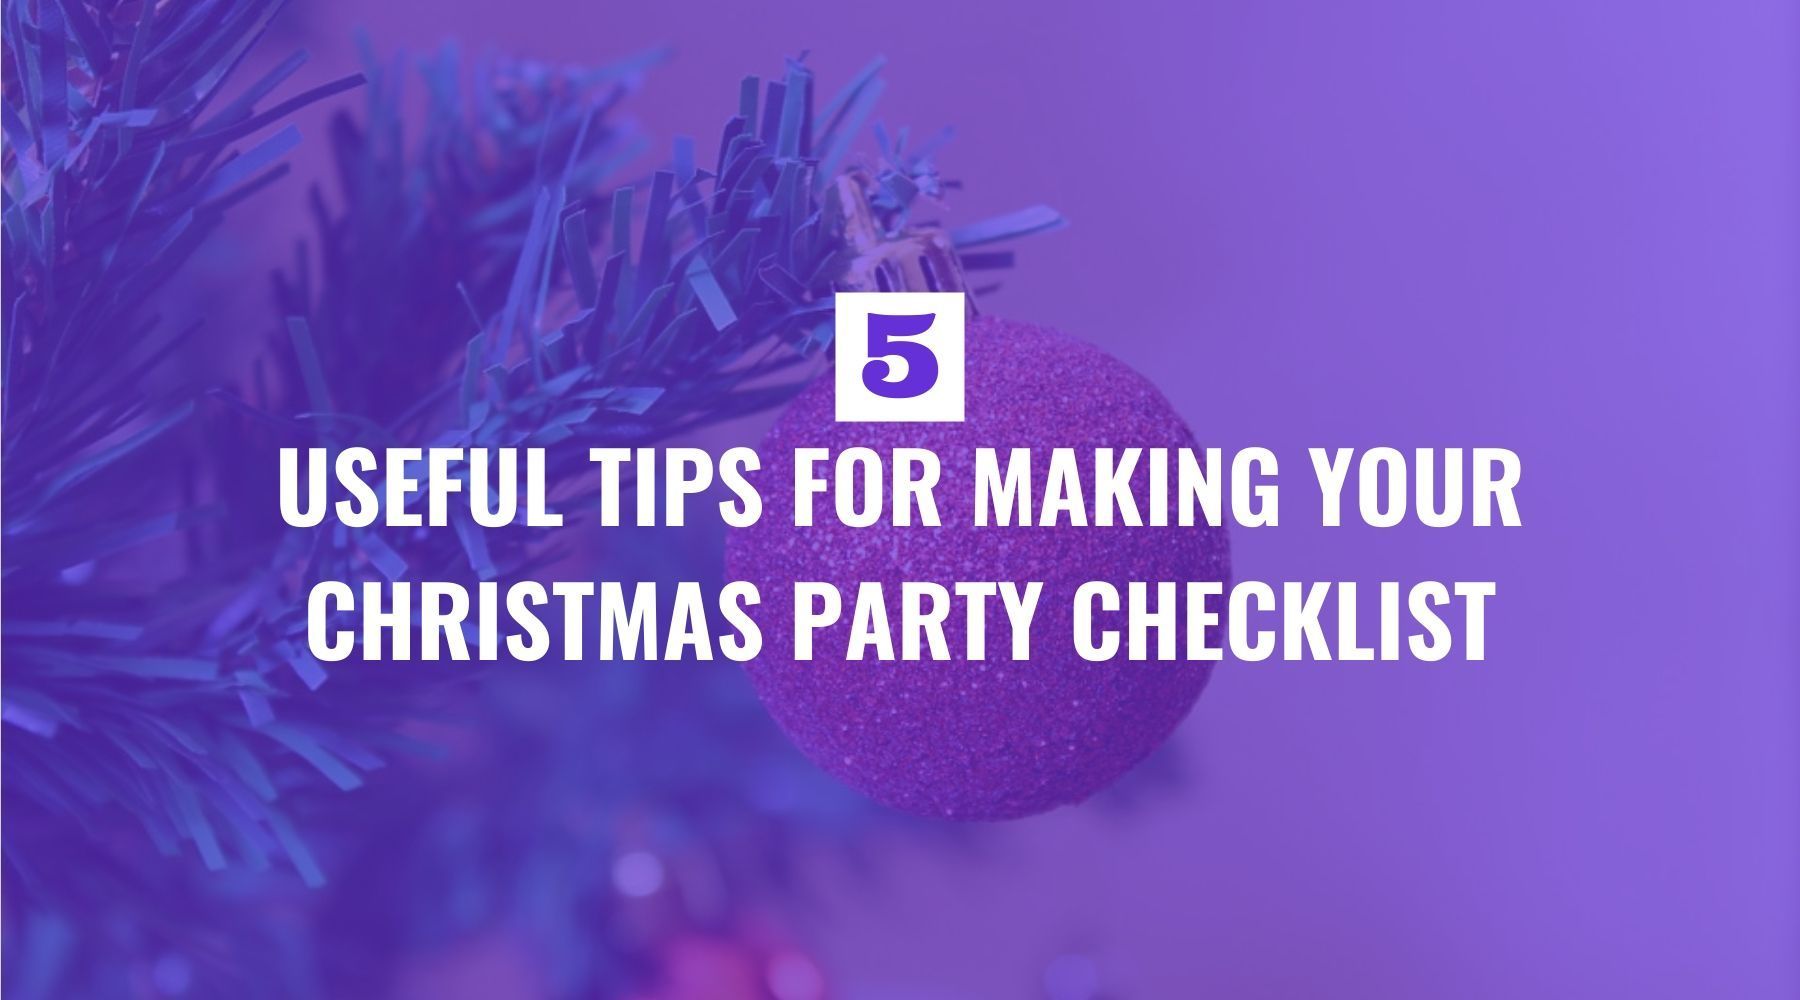 5 Useful Tips for Making Your Christmas Party Checklist